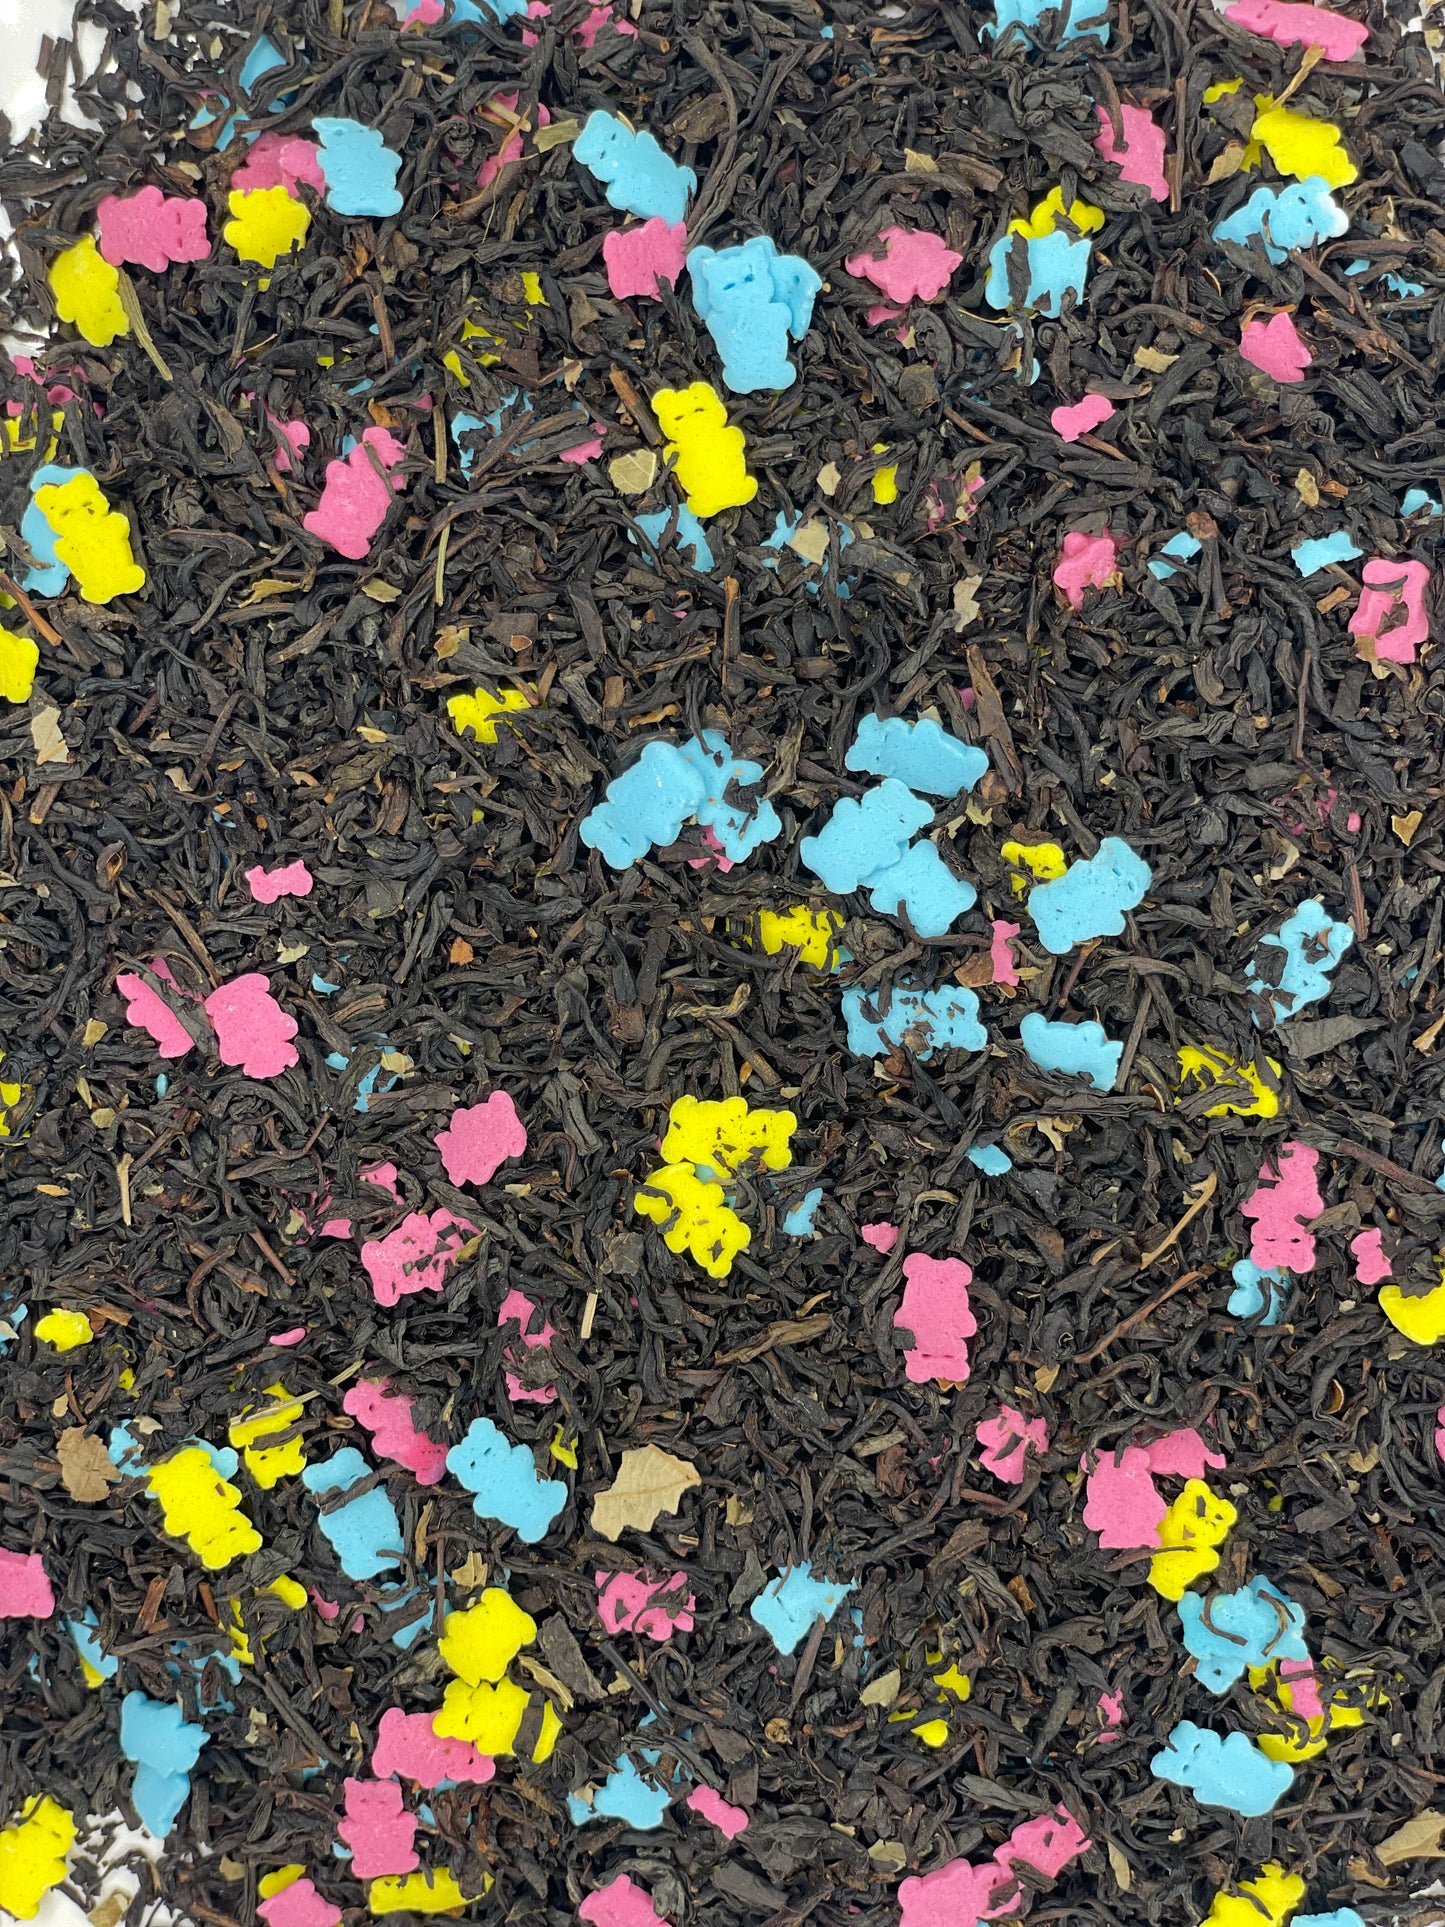 Boo Boo's Blackberry Flavored Loose Leaf Black Tea with Candy Teddy Bears